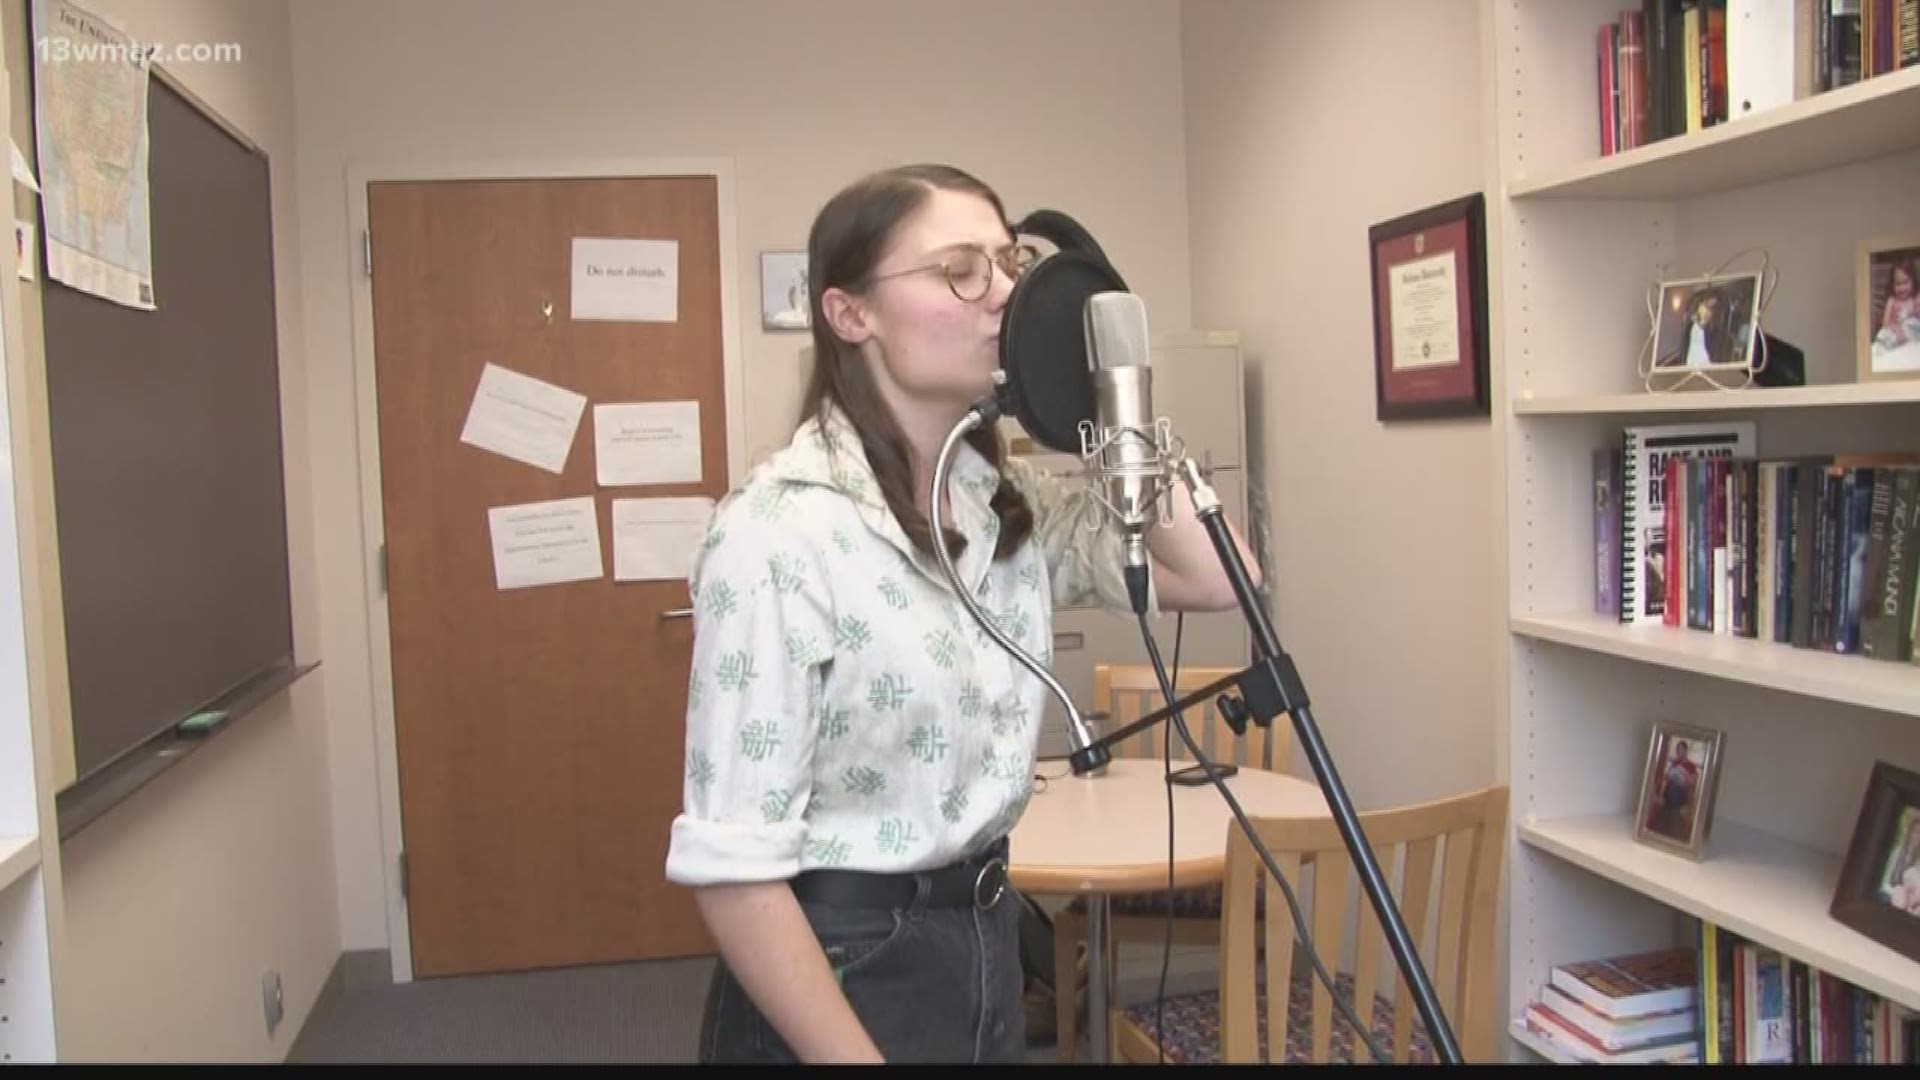 Georgia College students create song, donate proceeds